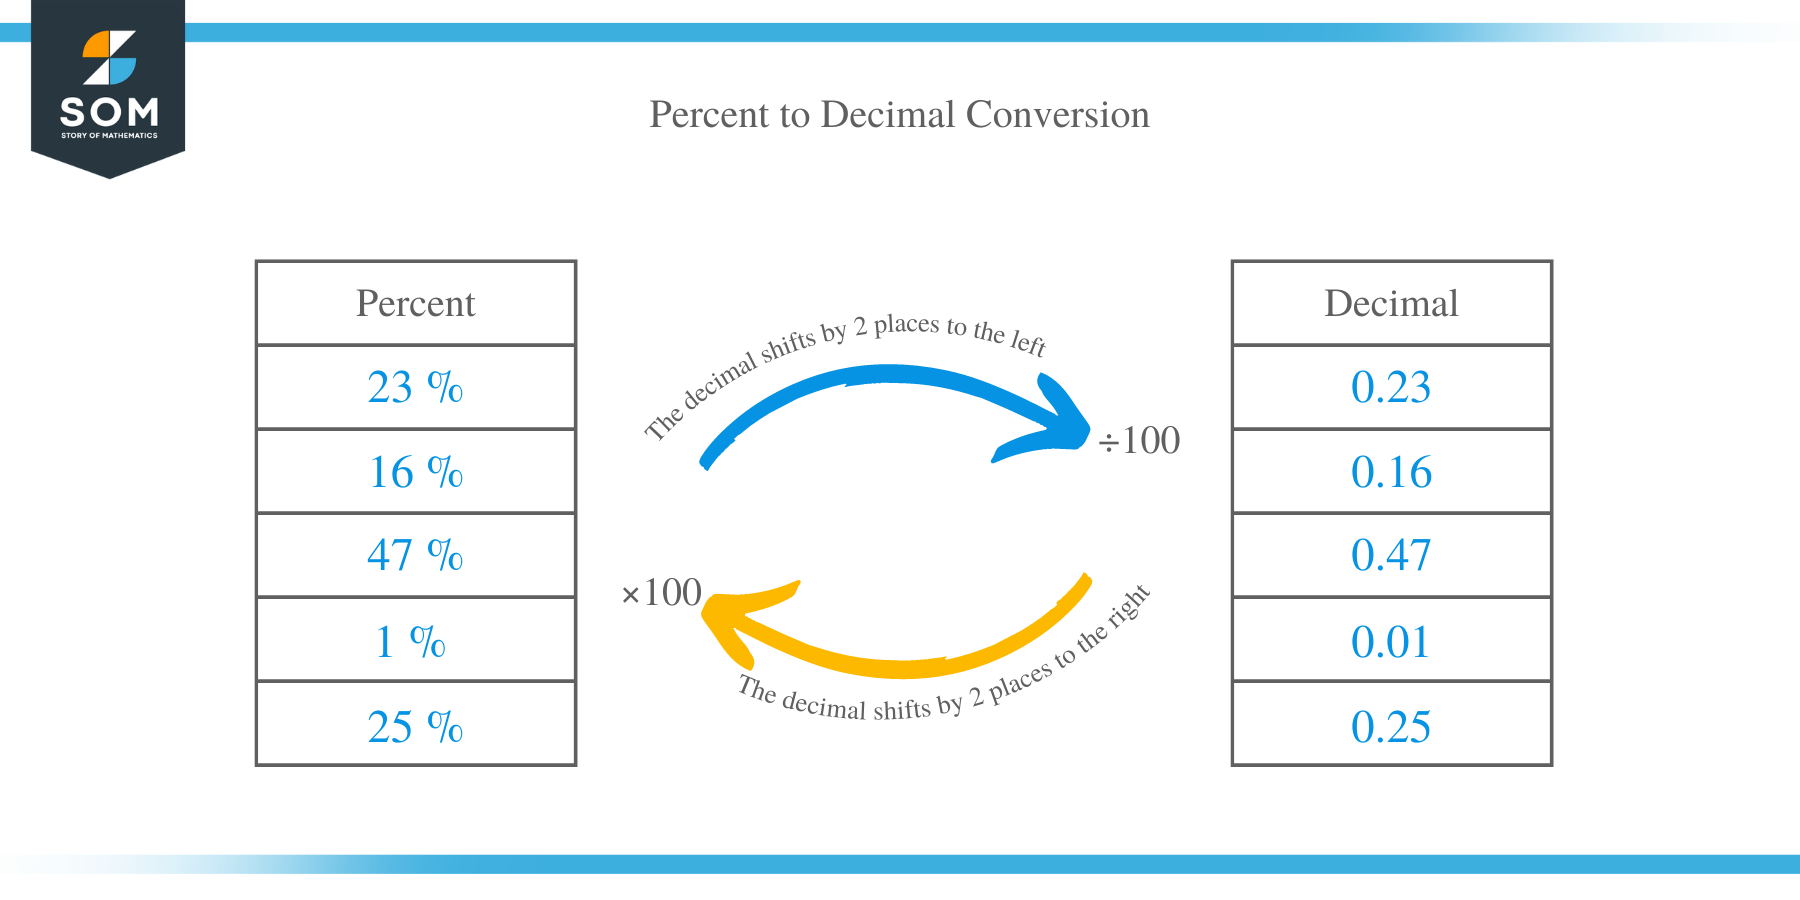 How to Convert Percent to Decimal?